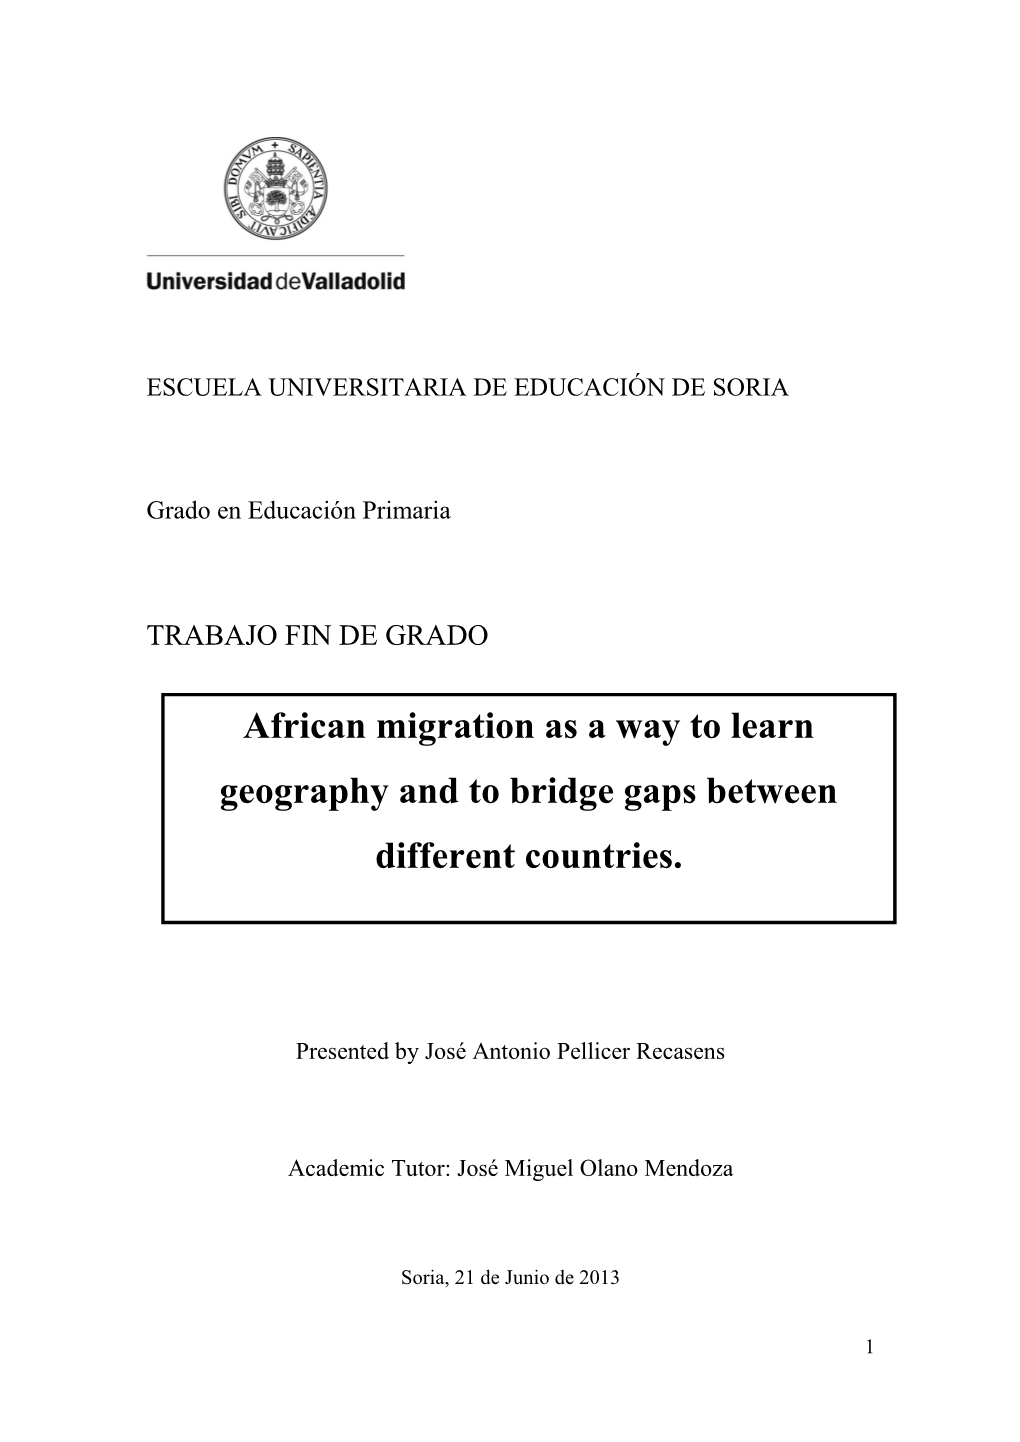 African Migration As a Way to Learn Geography and to Bridge Gaps Between Different Countries